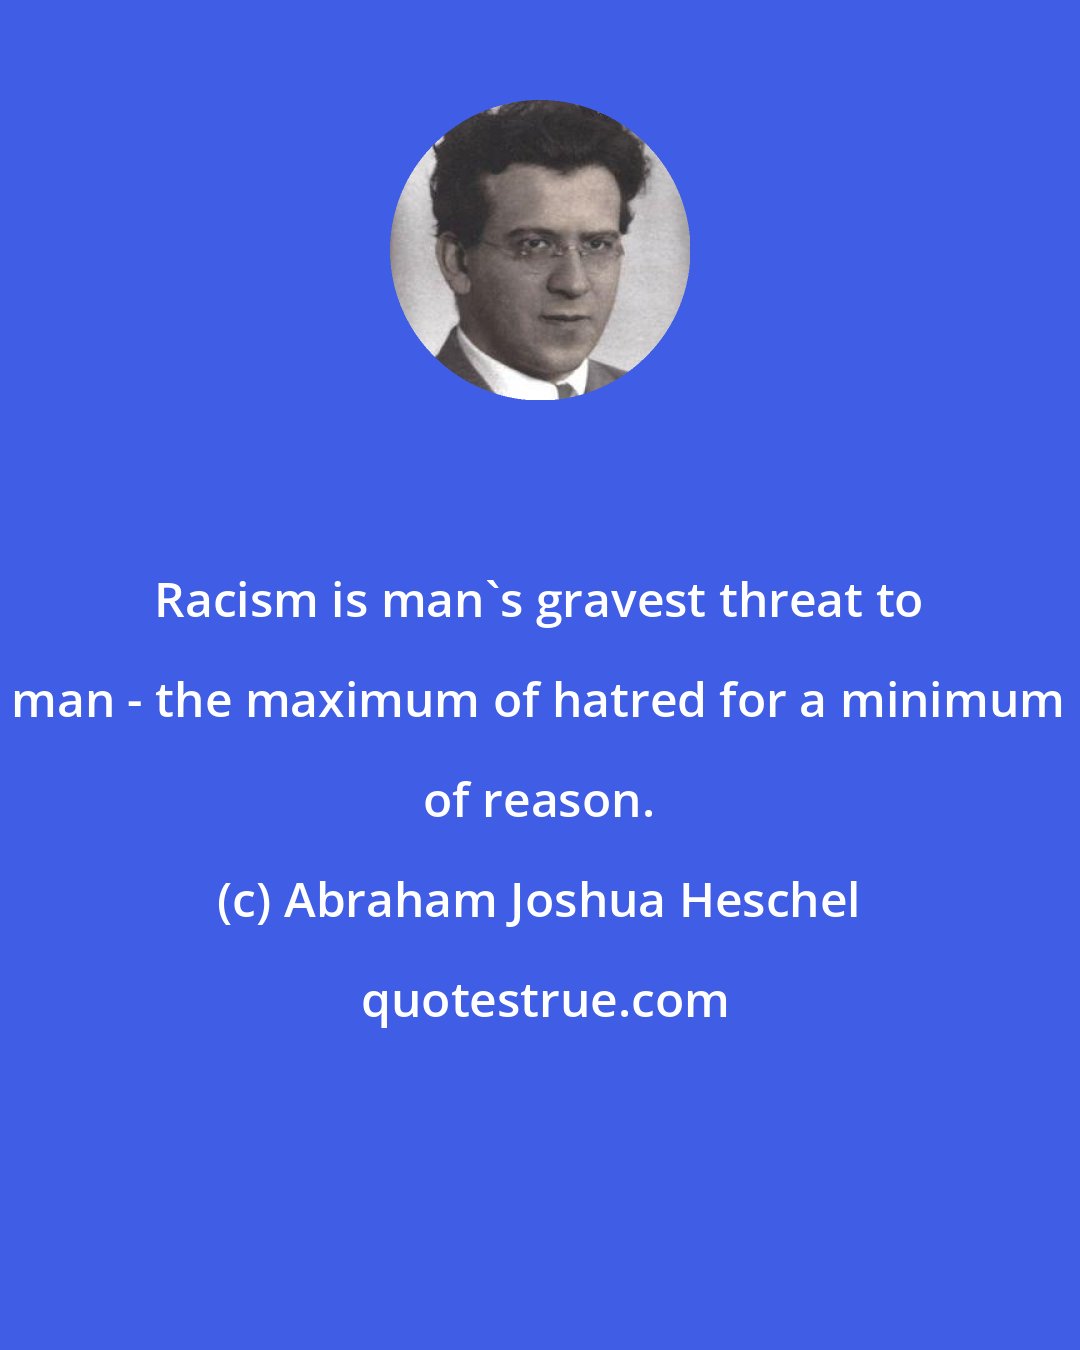 Abraham Joshua Heschel: Racism is man's gravest threat to man - the maximum of hatred for a minimum of reason.